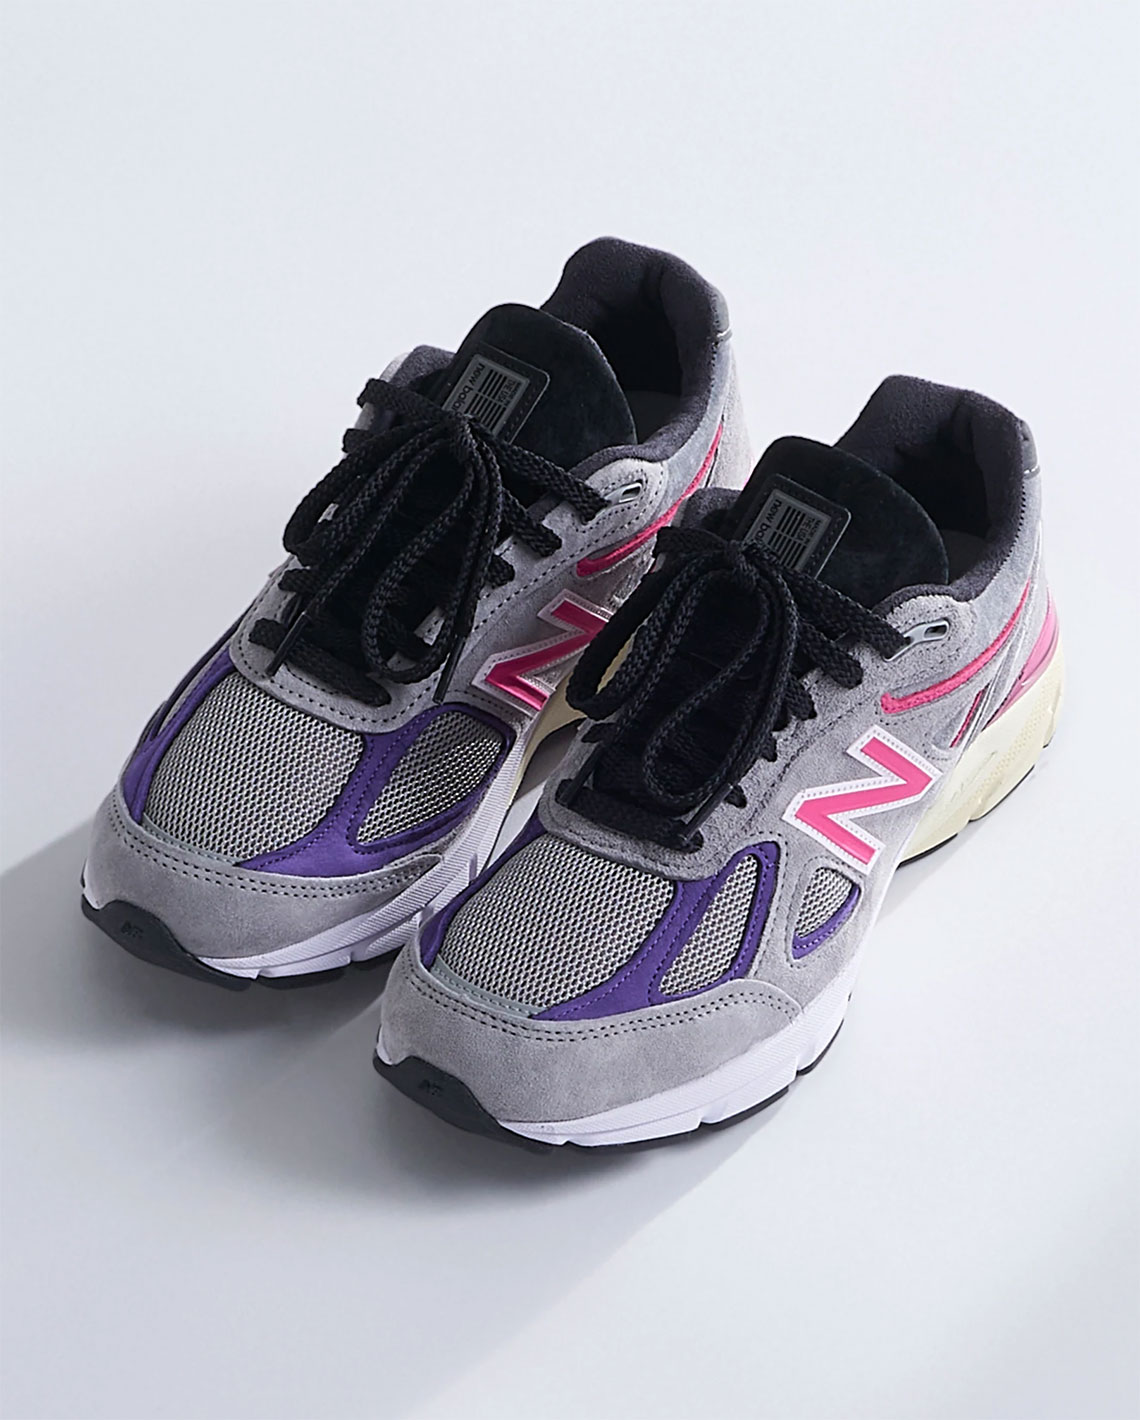 KITH New Balance 990v4 United Arrows & Sons Release Date